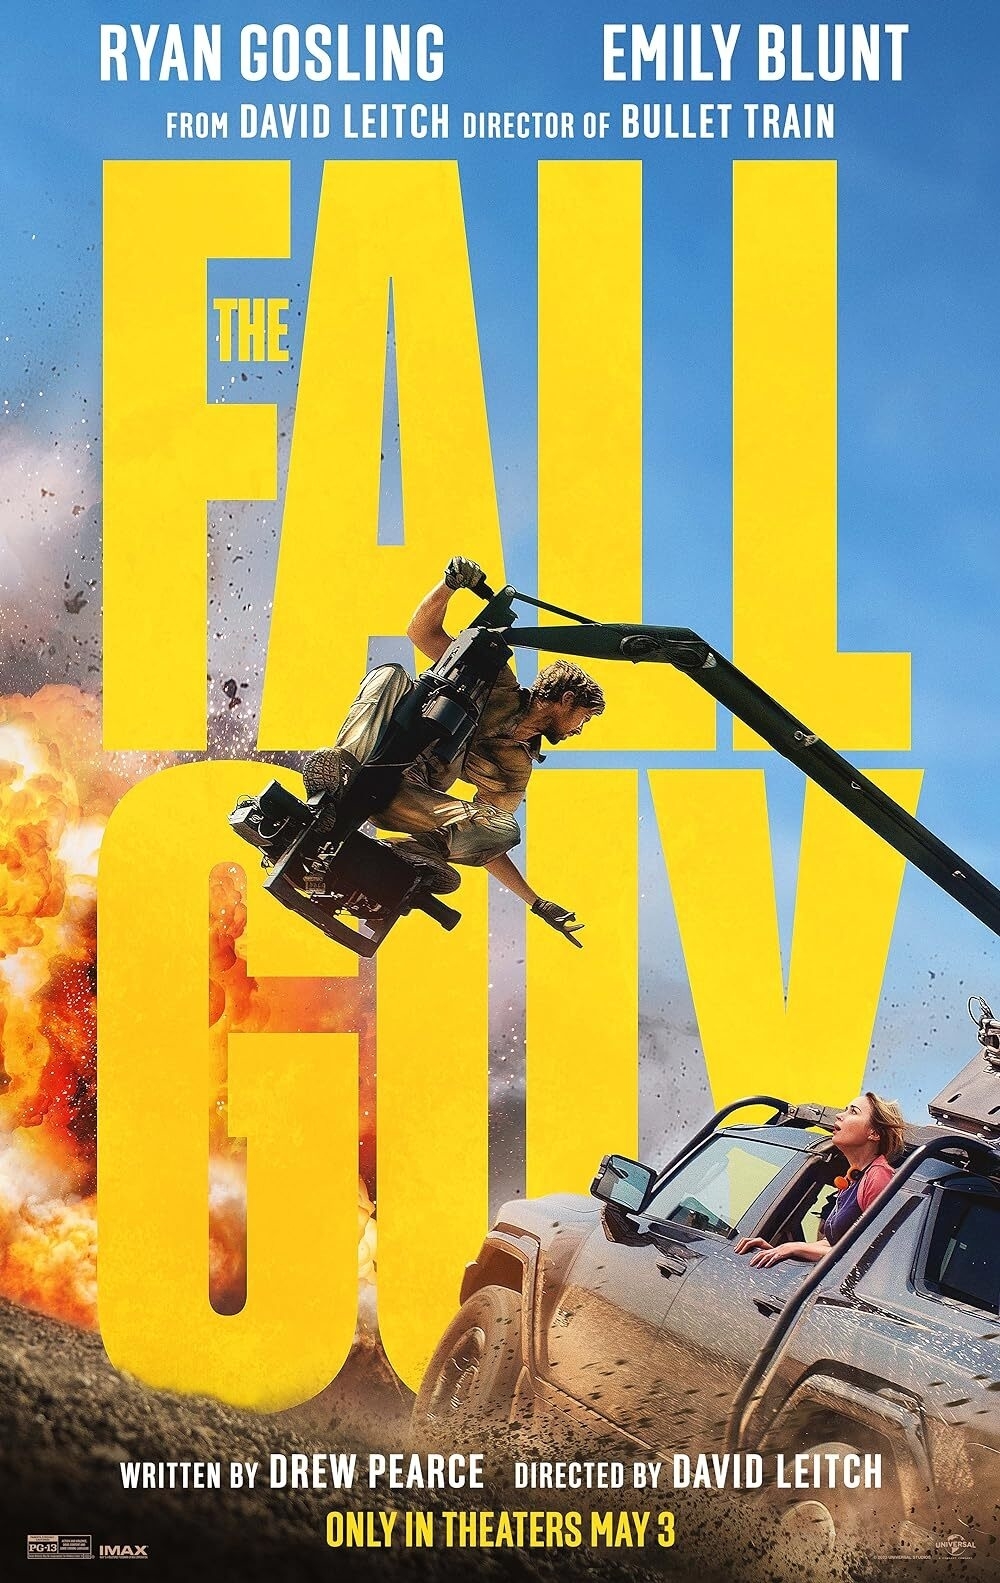 Movie poster for &quot;The Fall Guy&quot; showing Ryan Gosling and Emily Blunt in an action scene with an explosion. In theaters May 3